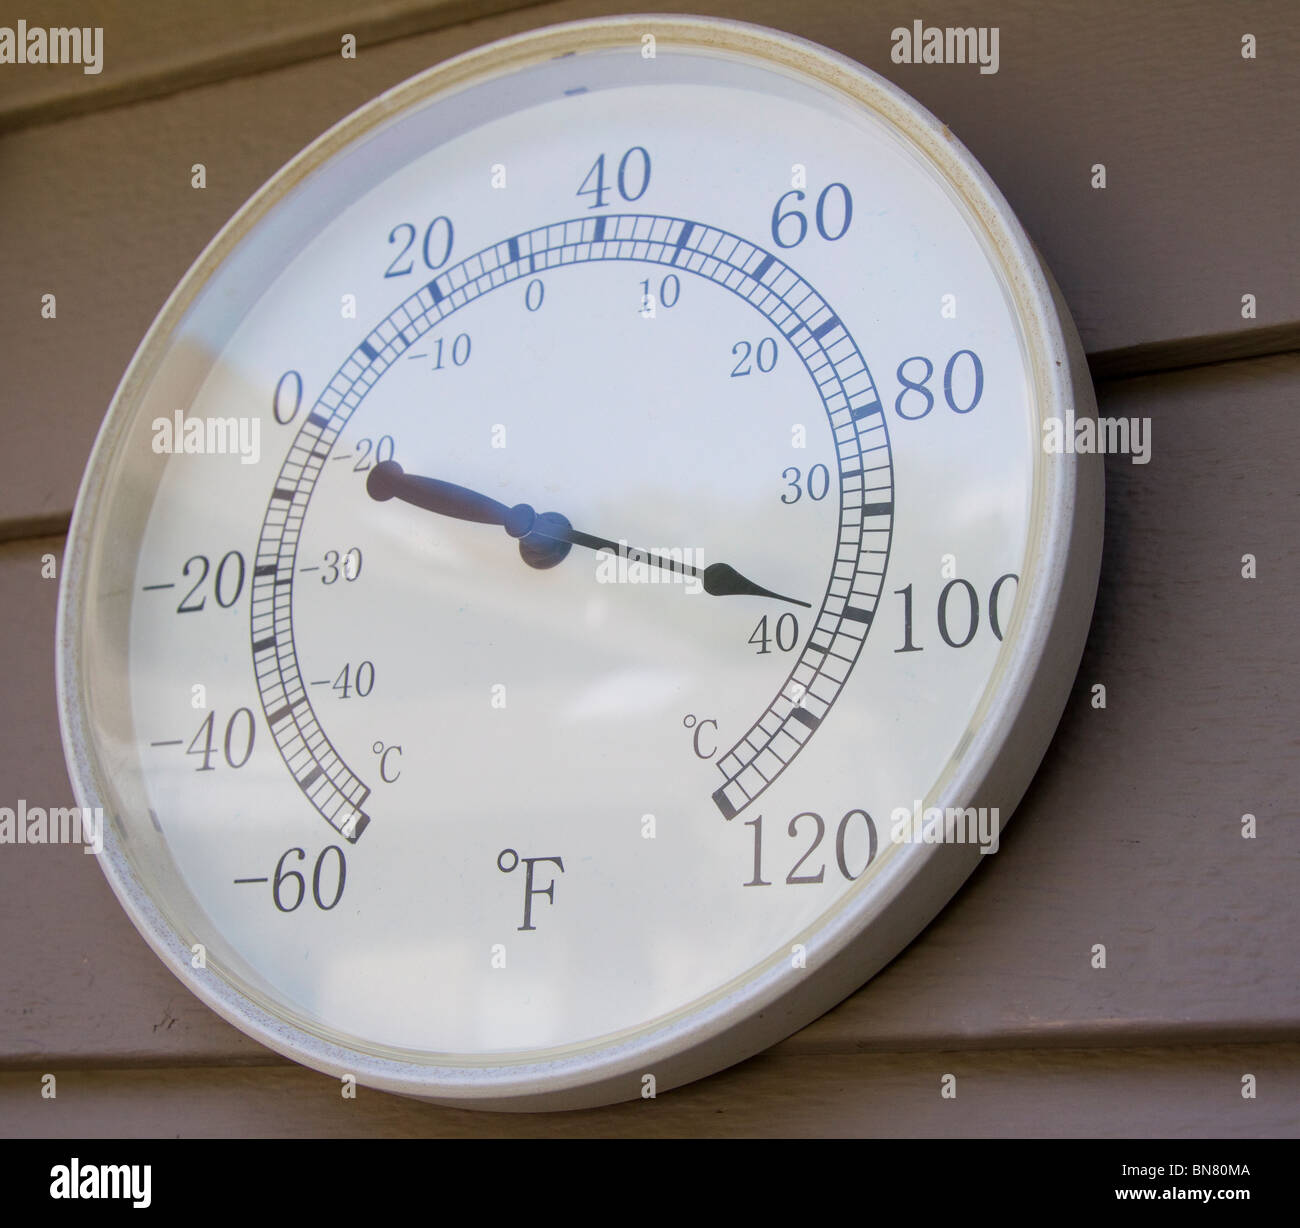 Outdoor thermometer showing 100 degree Fahrenheit temperature Stock Photo